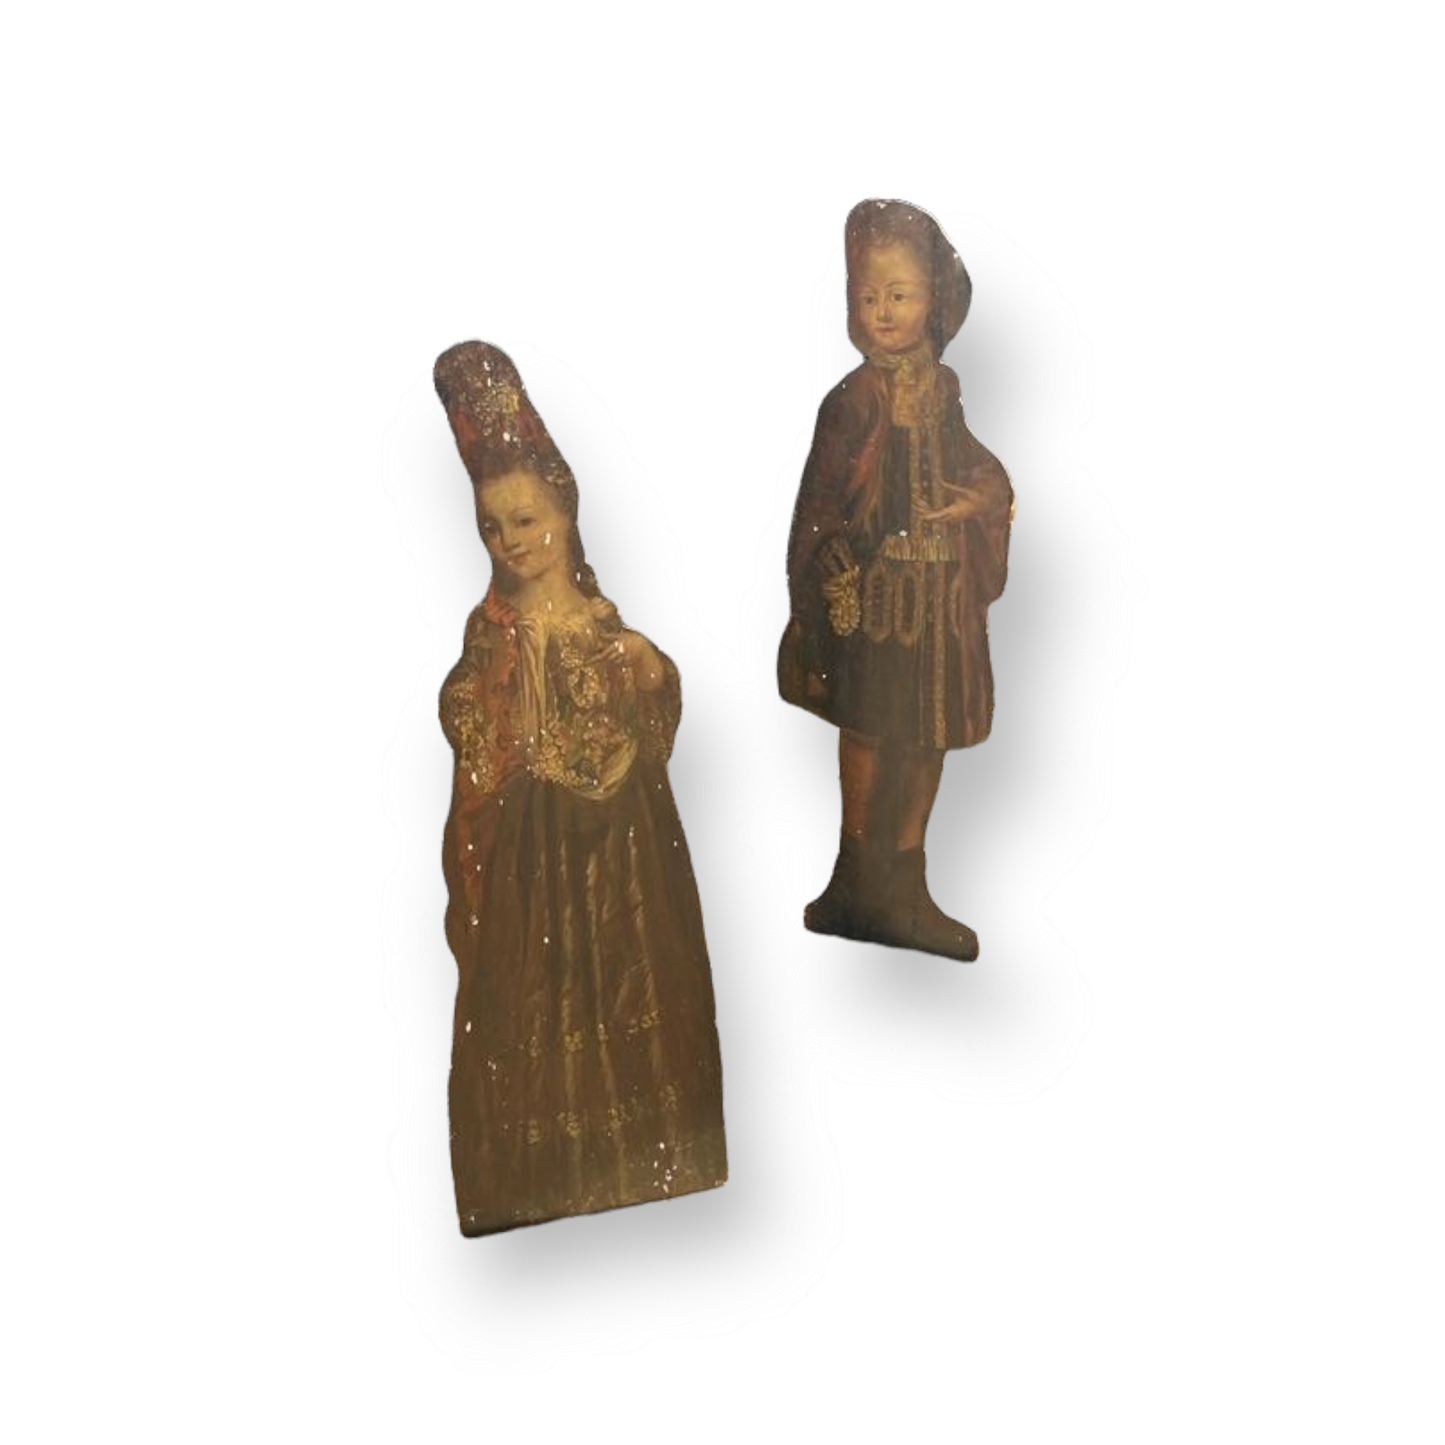 Pair of Early 18th Century English Antique Dummy Boards of an Aristocratic Boy and Girl